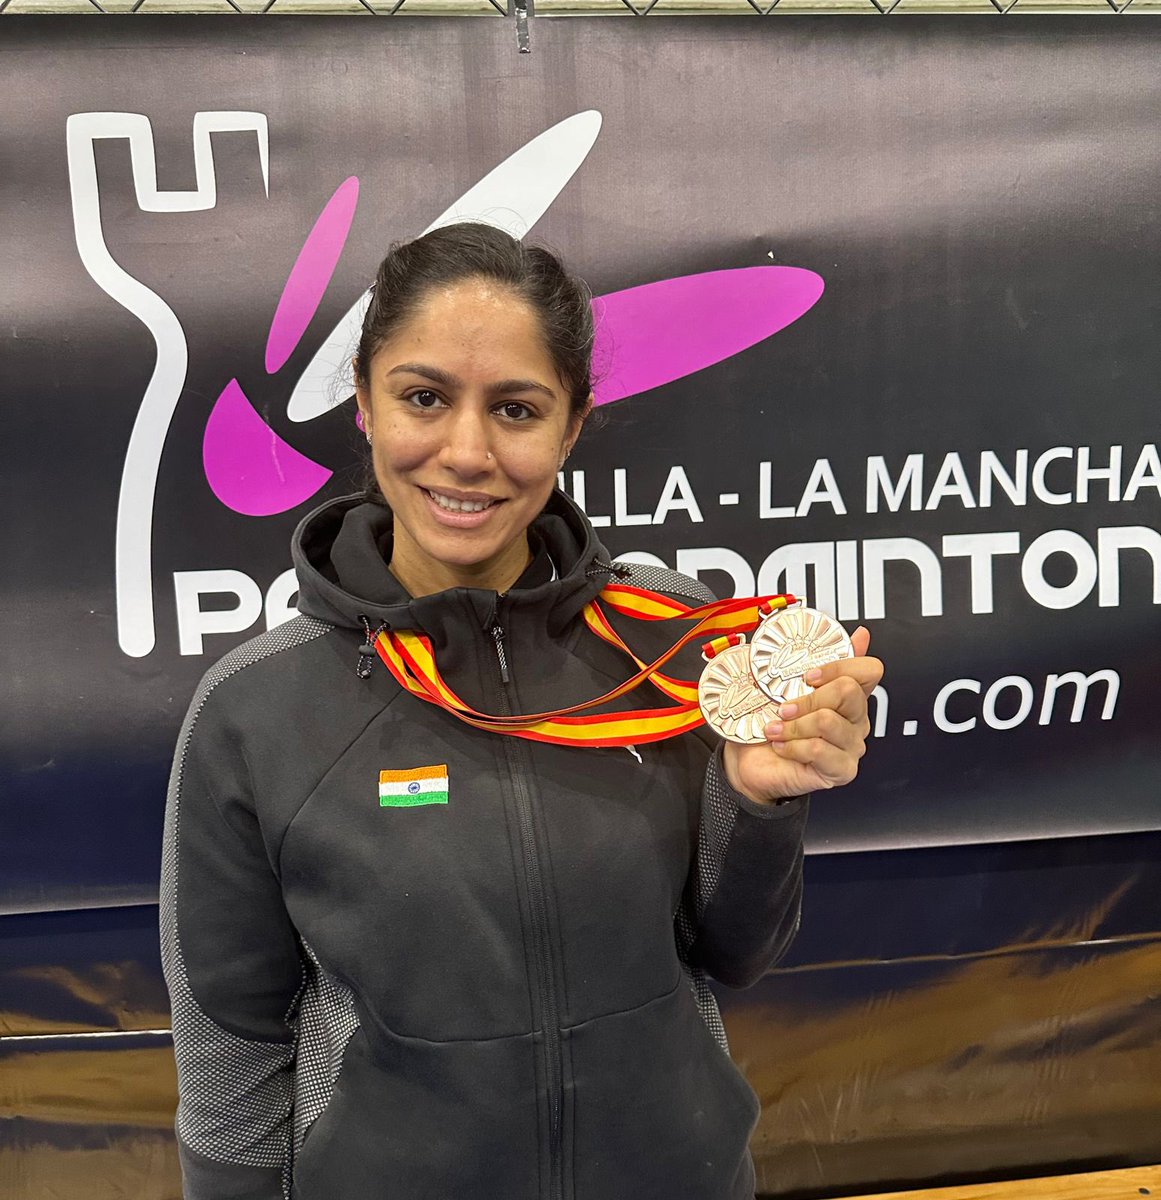 Manasi Joshi, you've done it again! 🏸 🥉 Two Bronze medals at the Spanish Para Badminton International – what an achievement! We're thrilled to hear of your success and proud to have you in BPCL. Your passion and dedication are truly inspiring! Here's to many more triumphs…